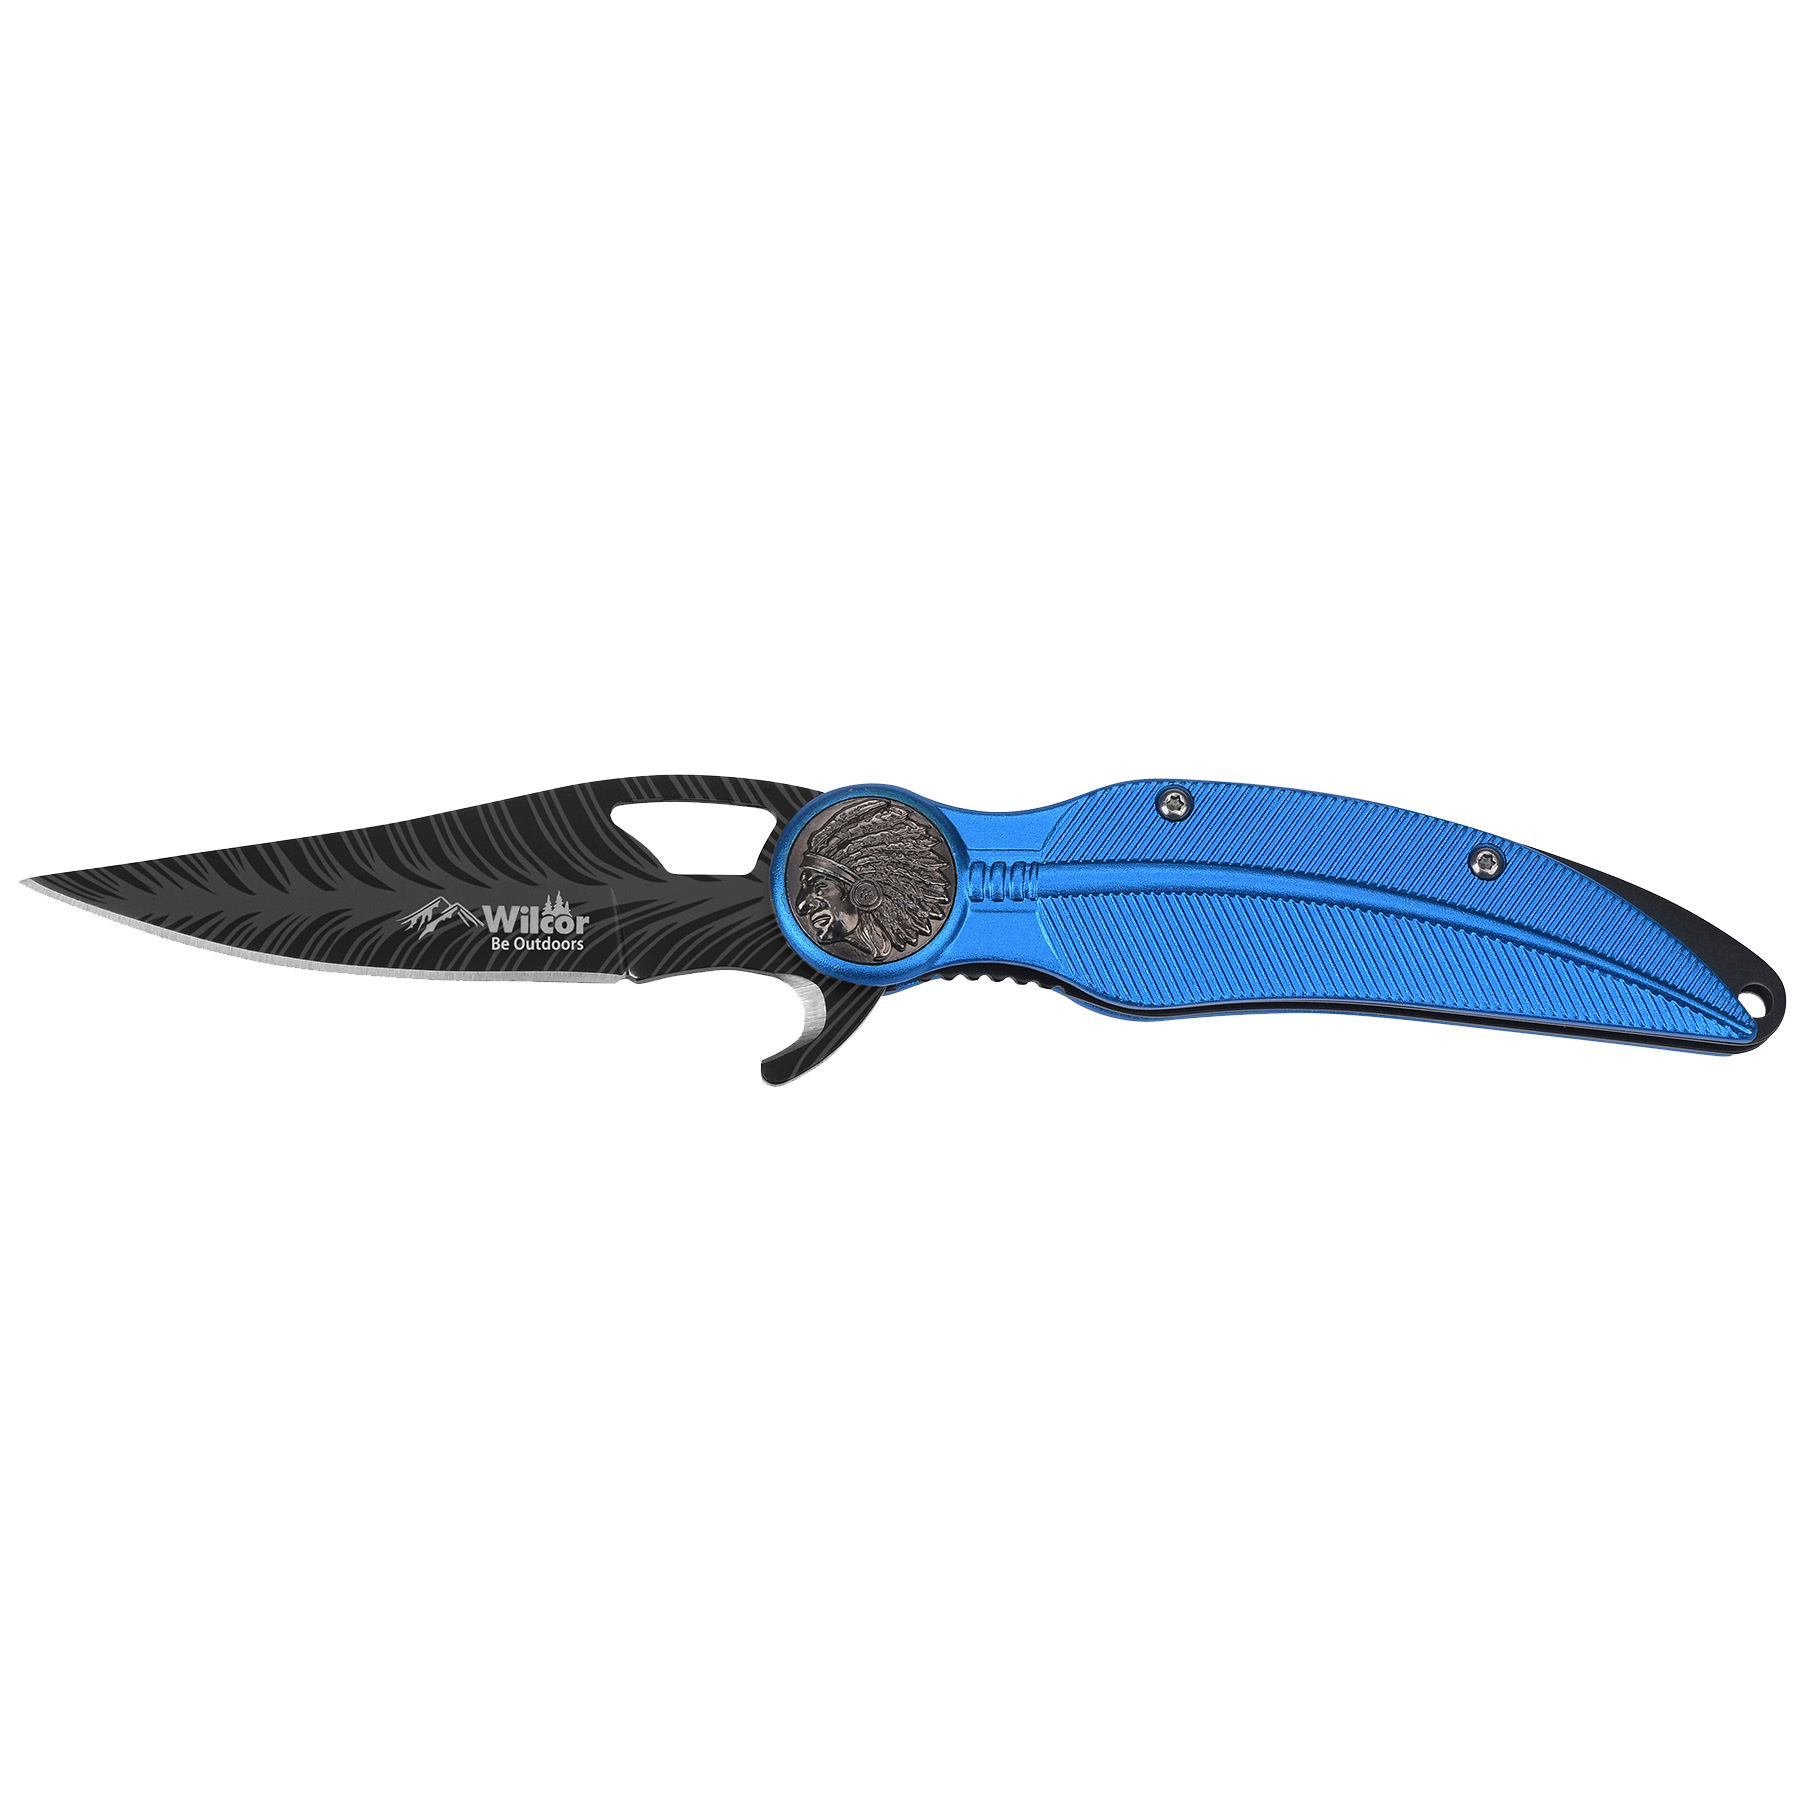 KNIFE FEATHER OPEN ASSIST BLUE 4.5